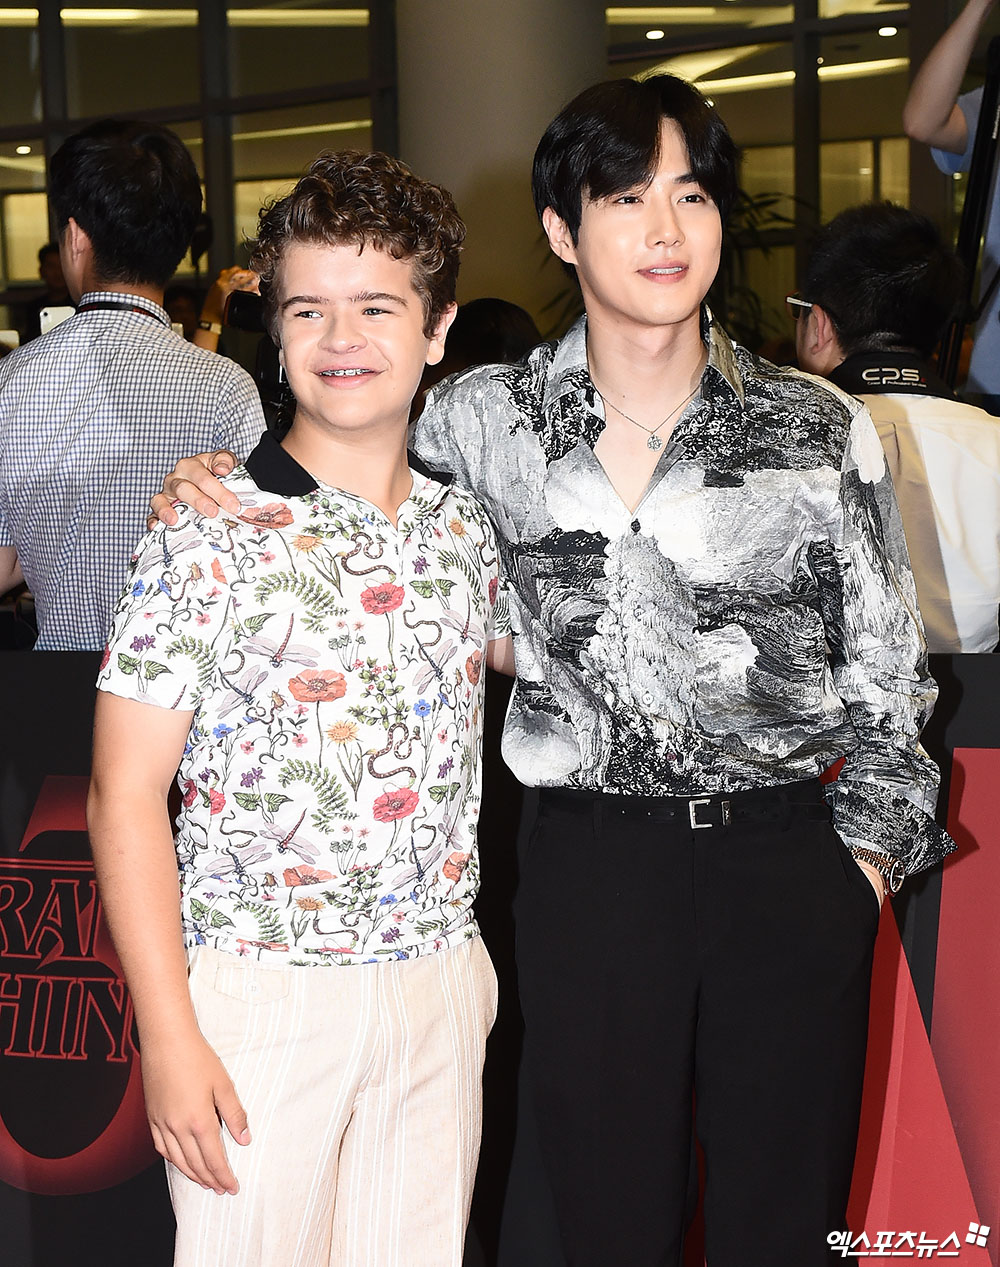 Actors Gayton Matarazo and Exo Suho pose at the red carpet event of Netflixs popular original series Queen Story 3 held at Time Square in Yeongdeungpo, Seoul on the afternoon of the 20th.